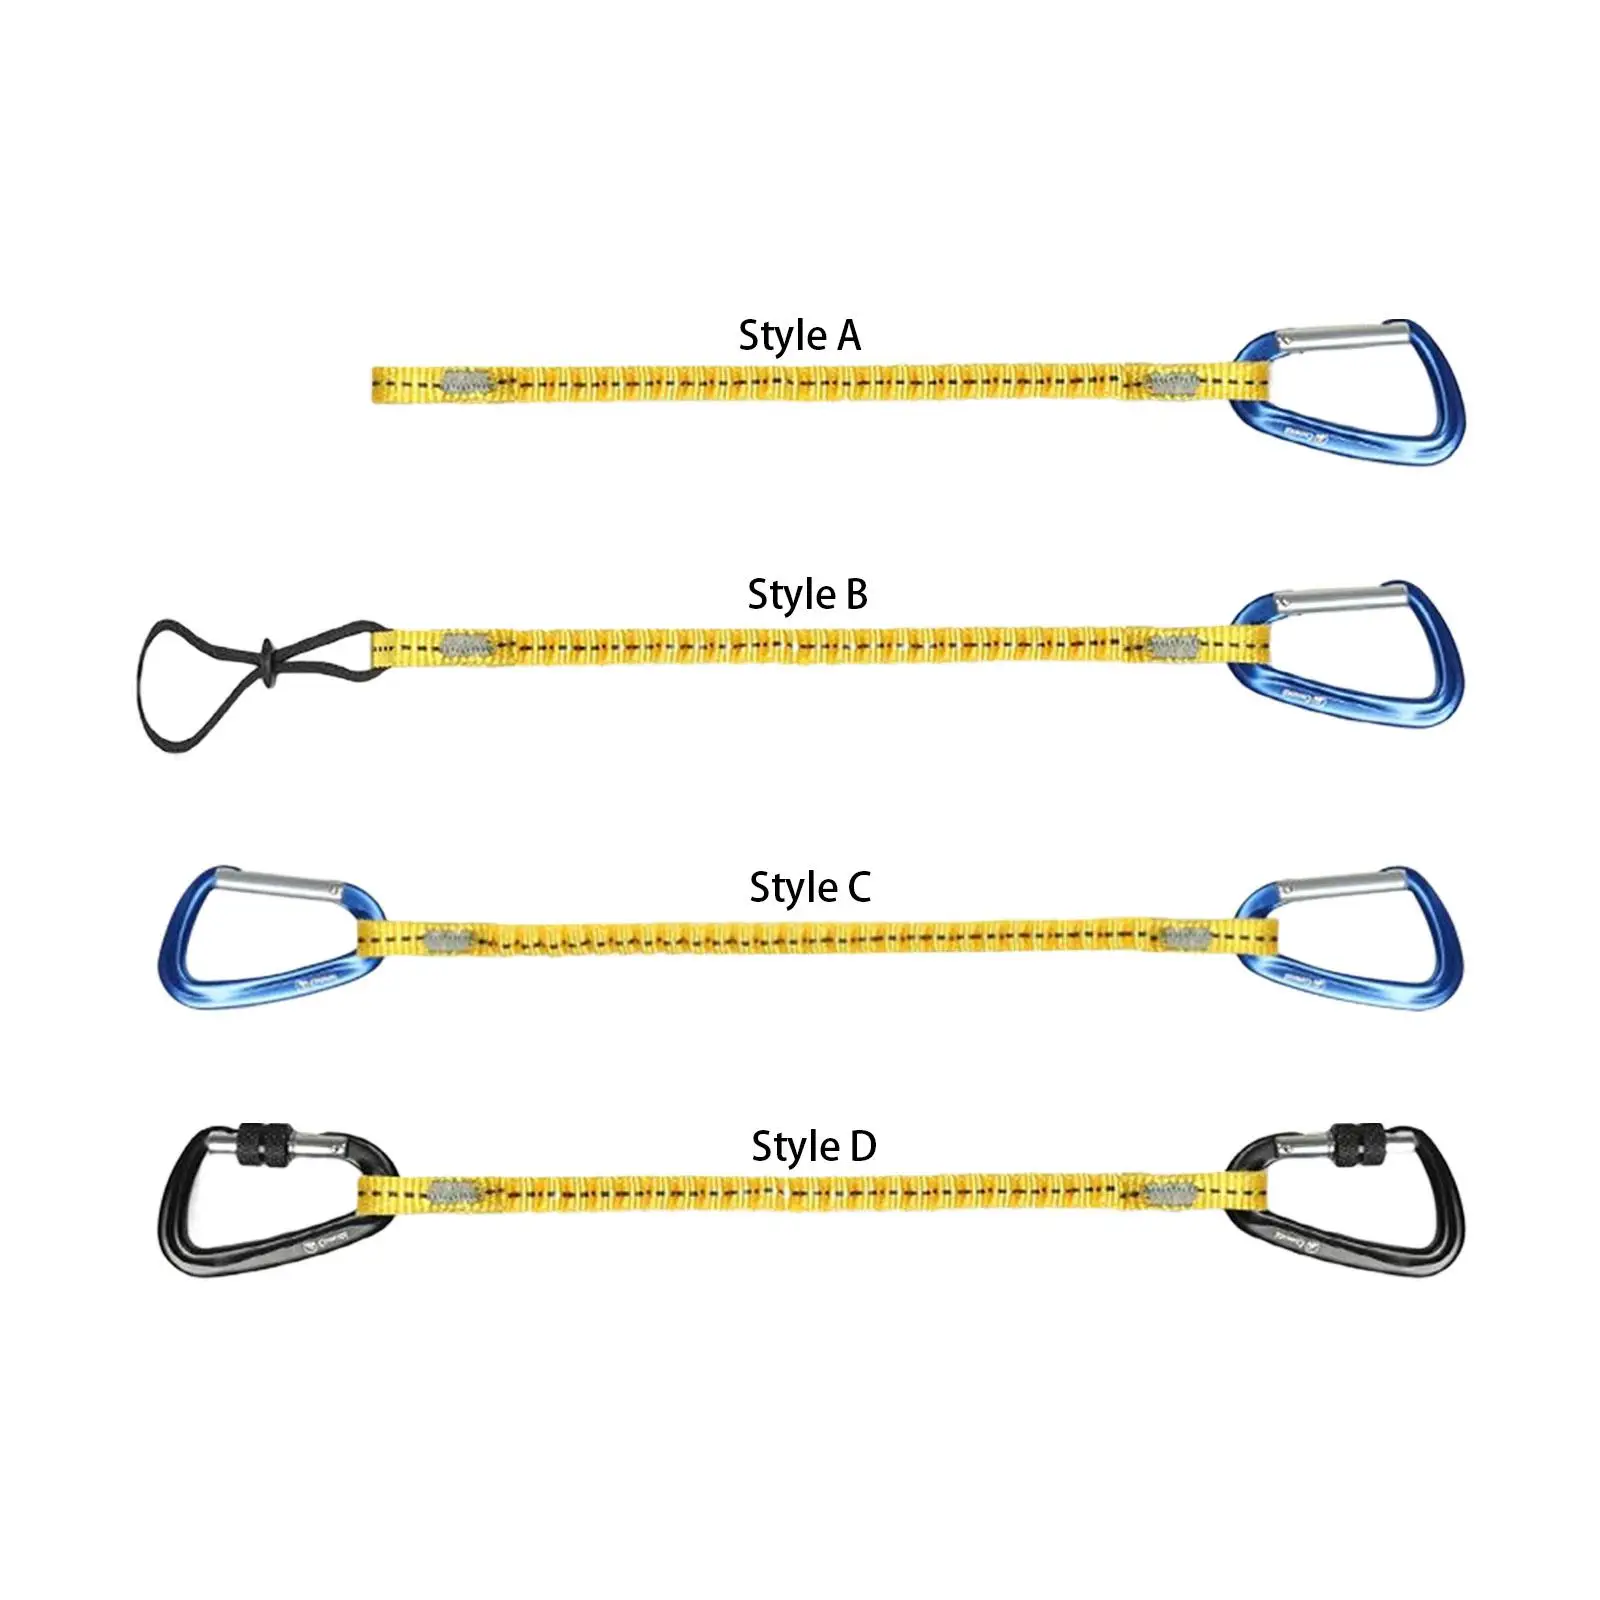 Tool Lanyard Bungee Cord Tether Tool for Training Mountaineering Camping Outdoor